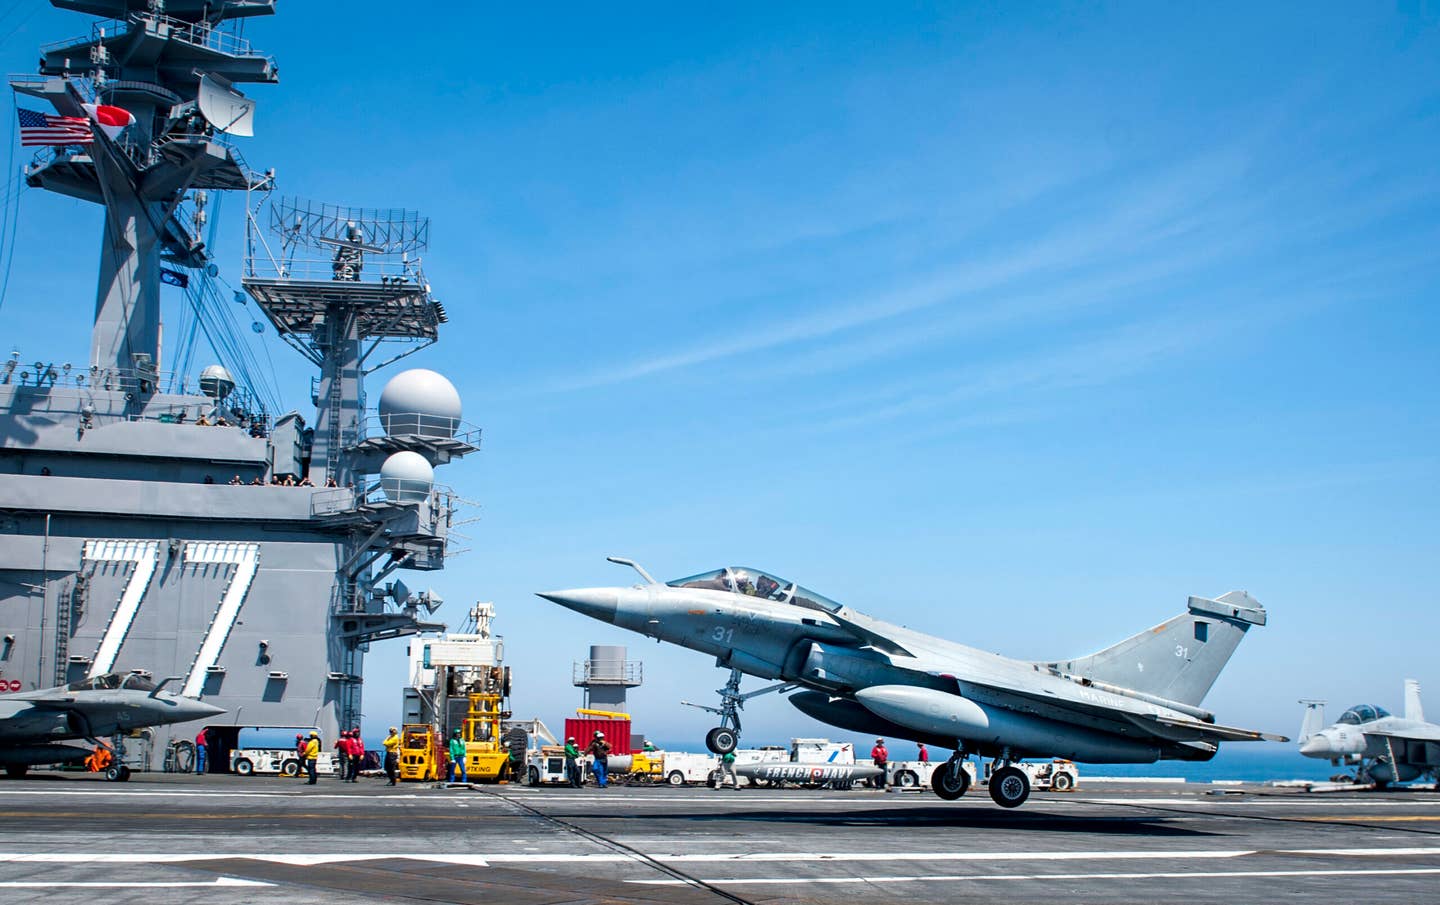 A French Navy Rafale M lands during flight operations aboard the aircraft carrier USS <em>George H.W. Bush</em> (CVN-77). <em>U.S. Navy photo by Mass Communication Specialist 3rd Class Brooke Macchietto/Released</em>